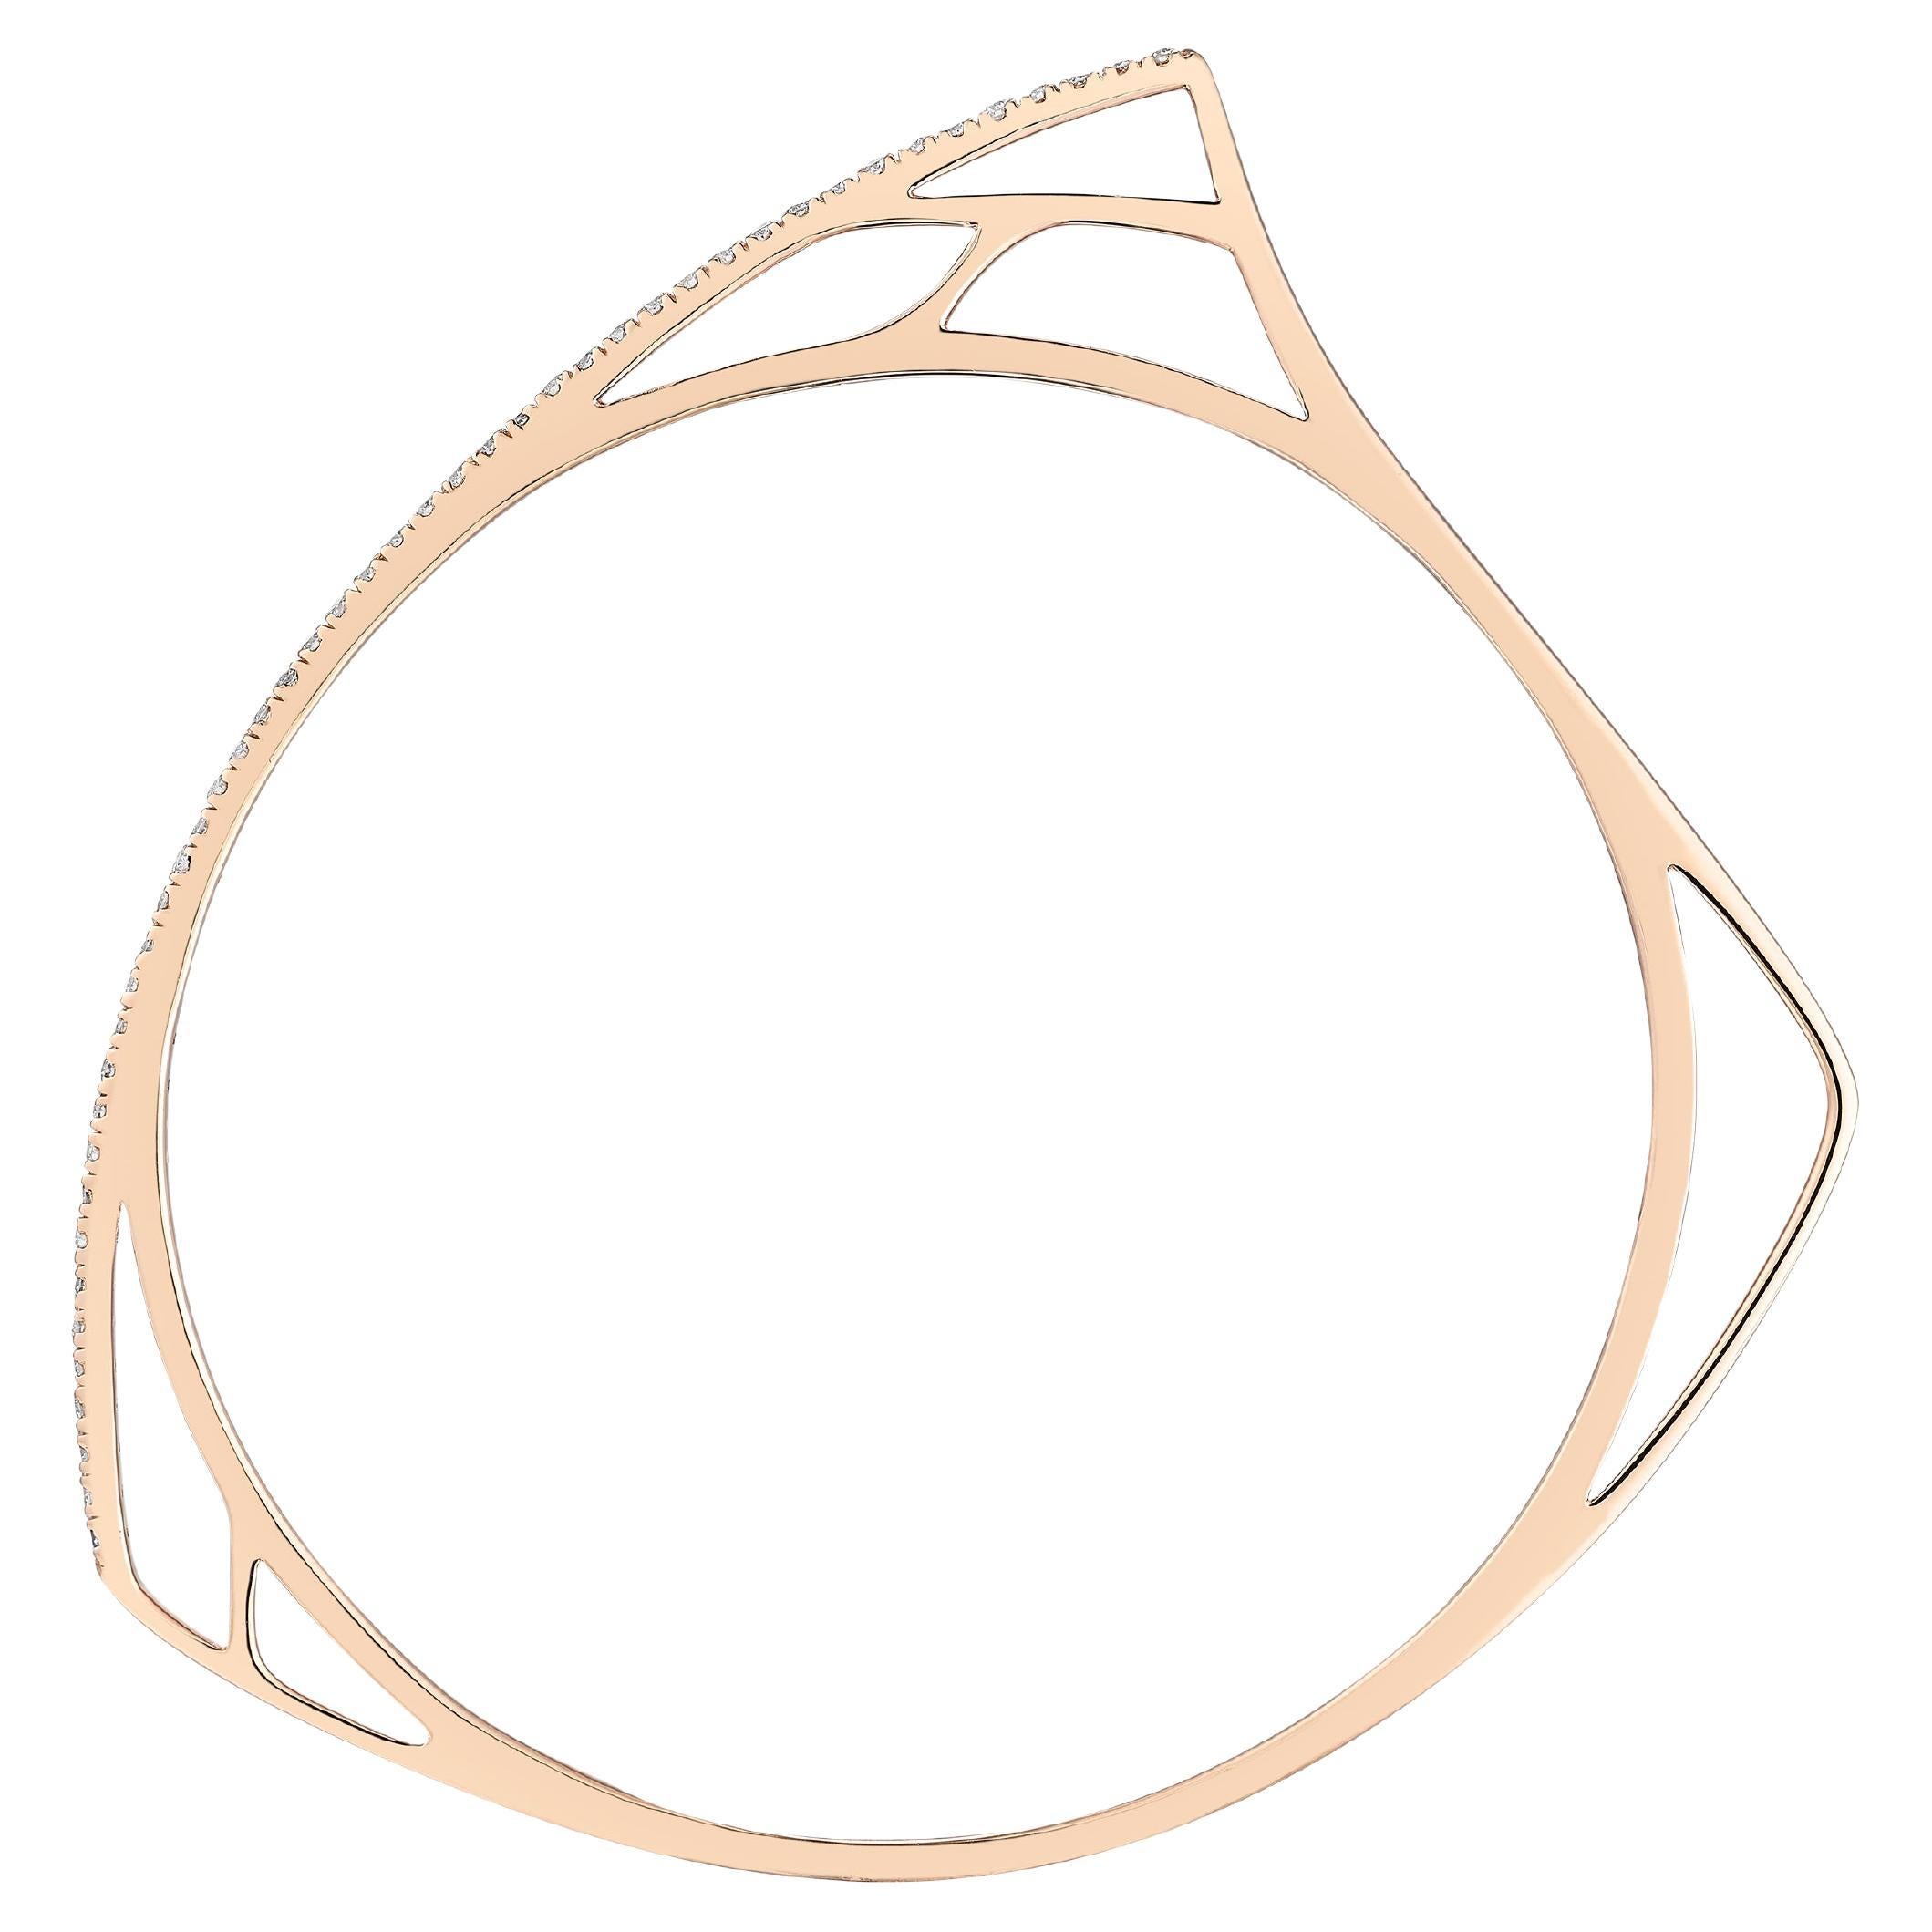 Contemporary Anabela Chan Fine Sustainable Jewelry Rose Gold Diamond Morpho Bracelet 2 Size M For Sale